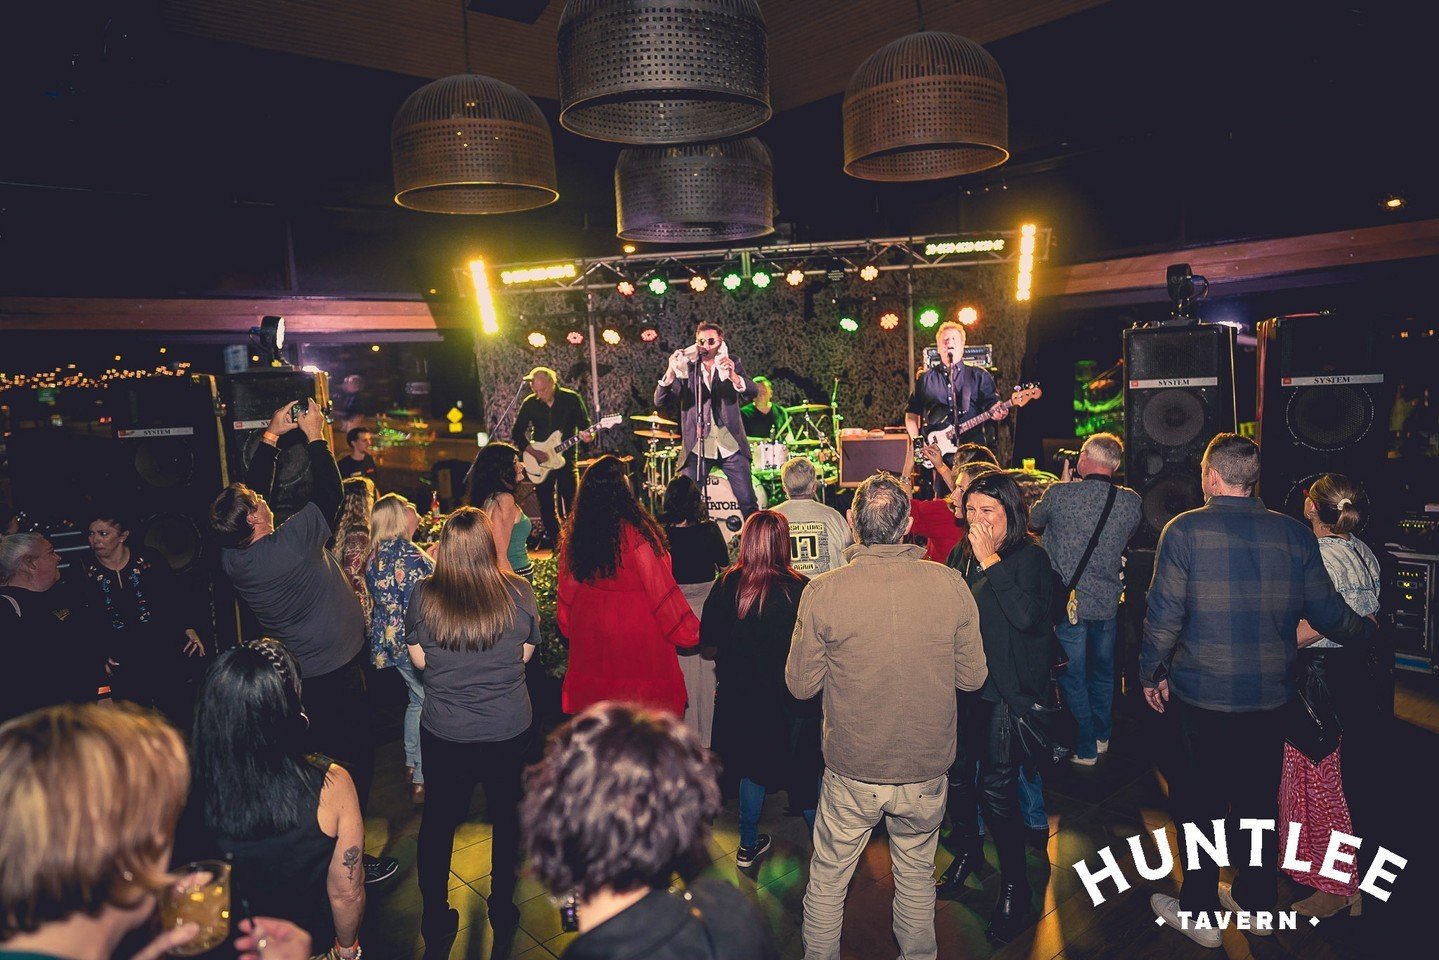 The Radiators return to Hunter Valley's Huntlee Tavern for a one-night-only event featuring their iconic 'Rock N Roll' tunes like &quot;Comin' Home&quot; and &quot;No Tragedy&quot;. Over 18s only. Doors open at 8 pm, support act from 9 pm Dinner rese